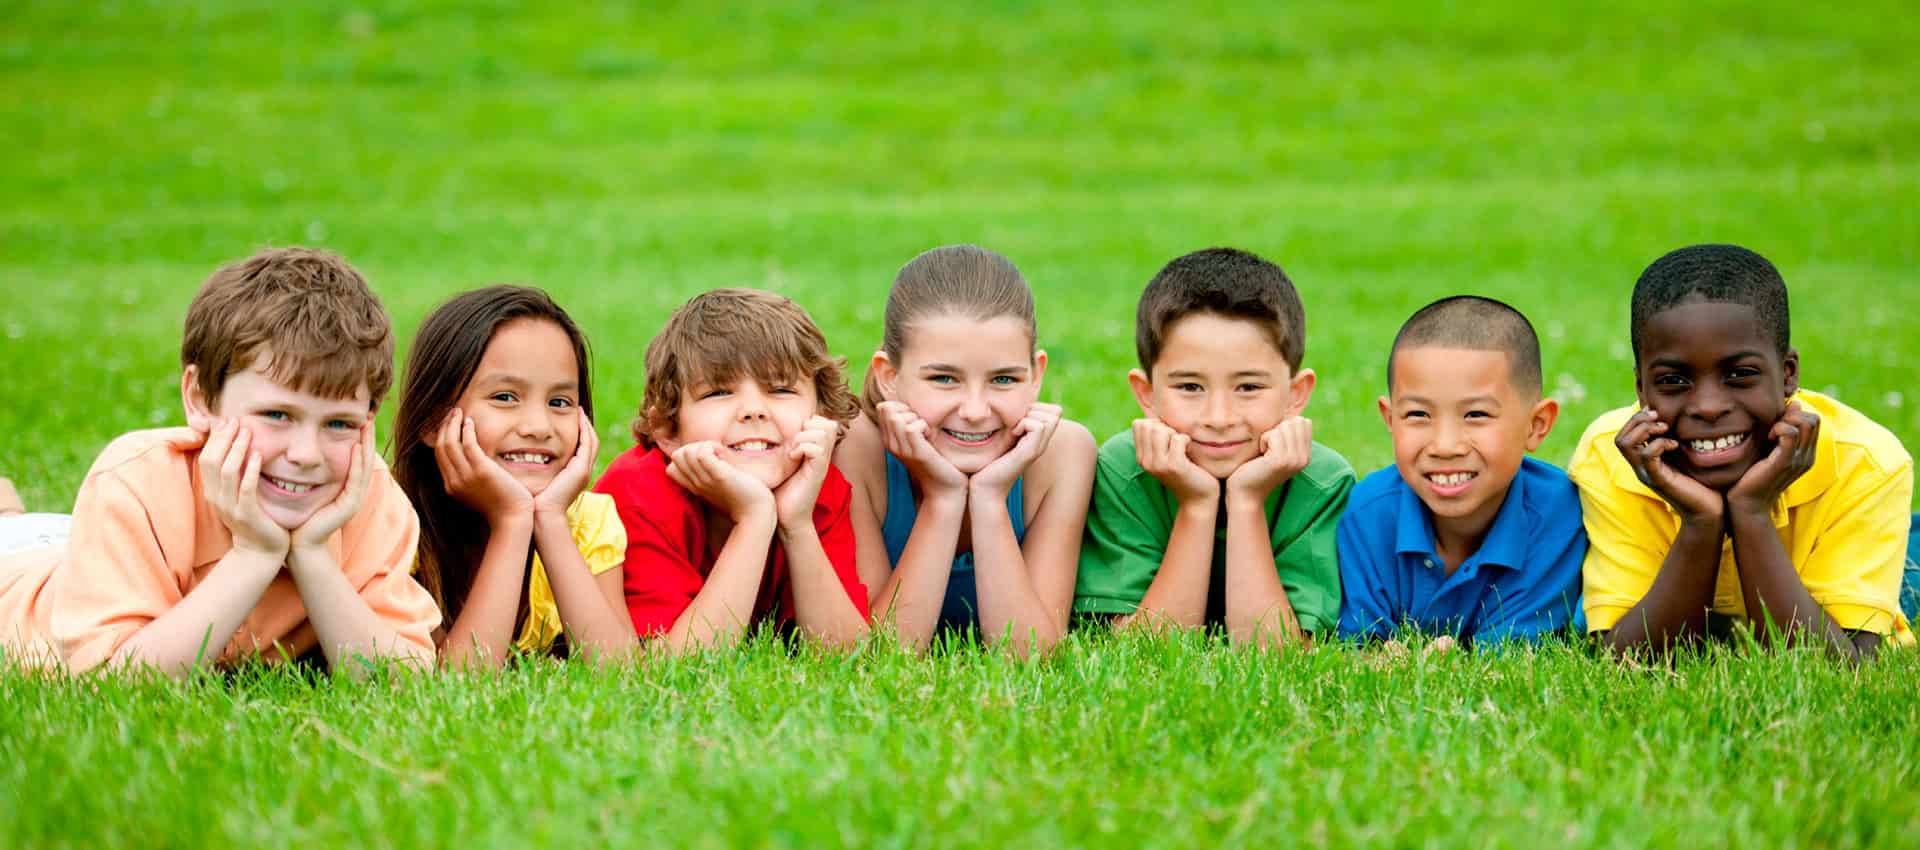 Kids in grass smiling